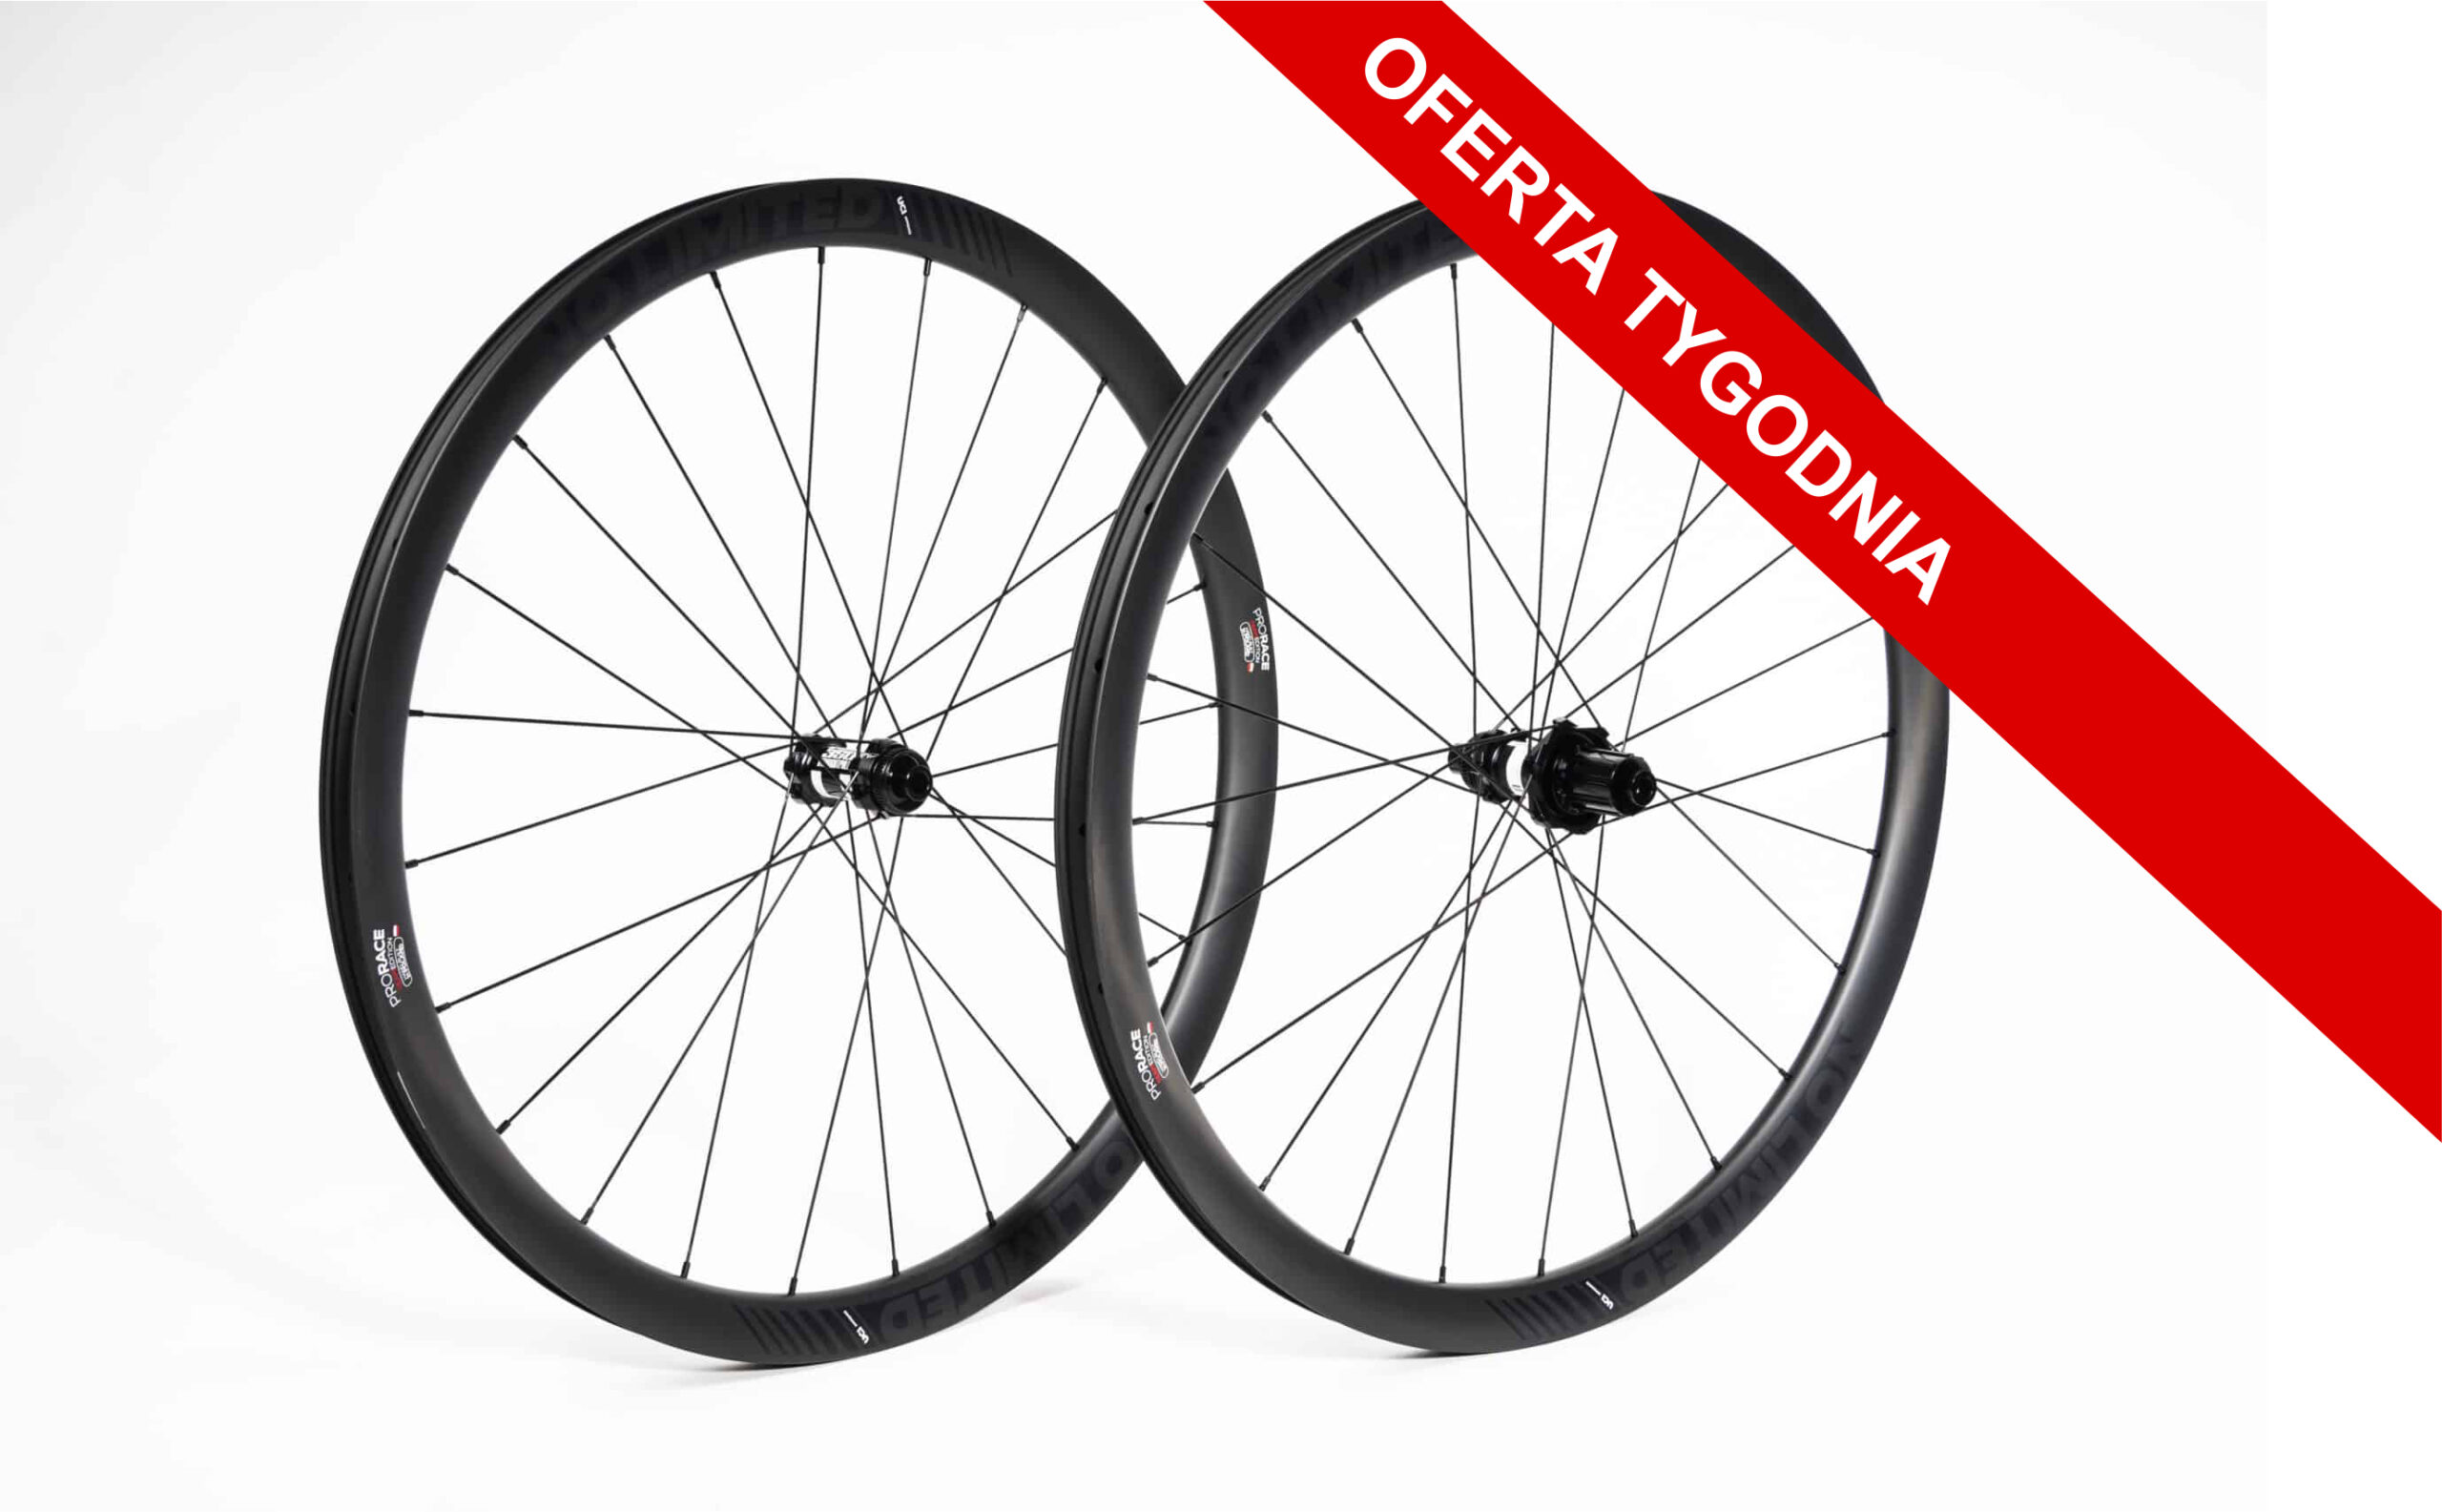 Road Wheels Carbon Weight 1430 gr No Limited